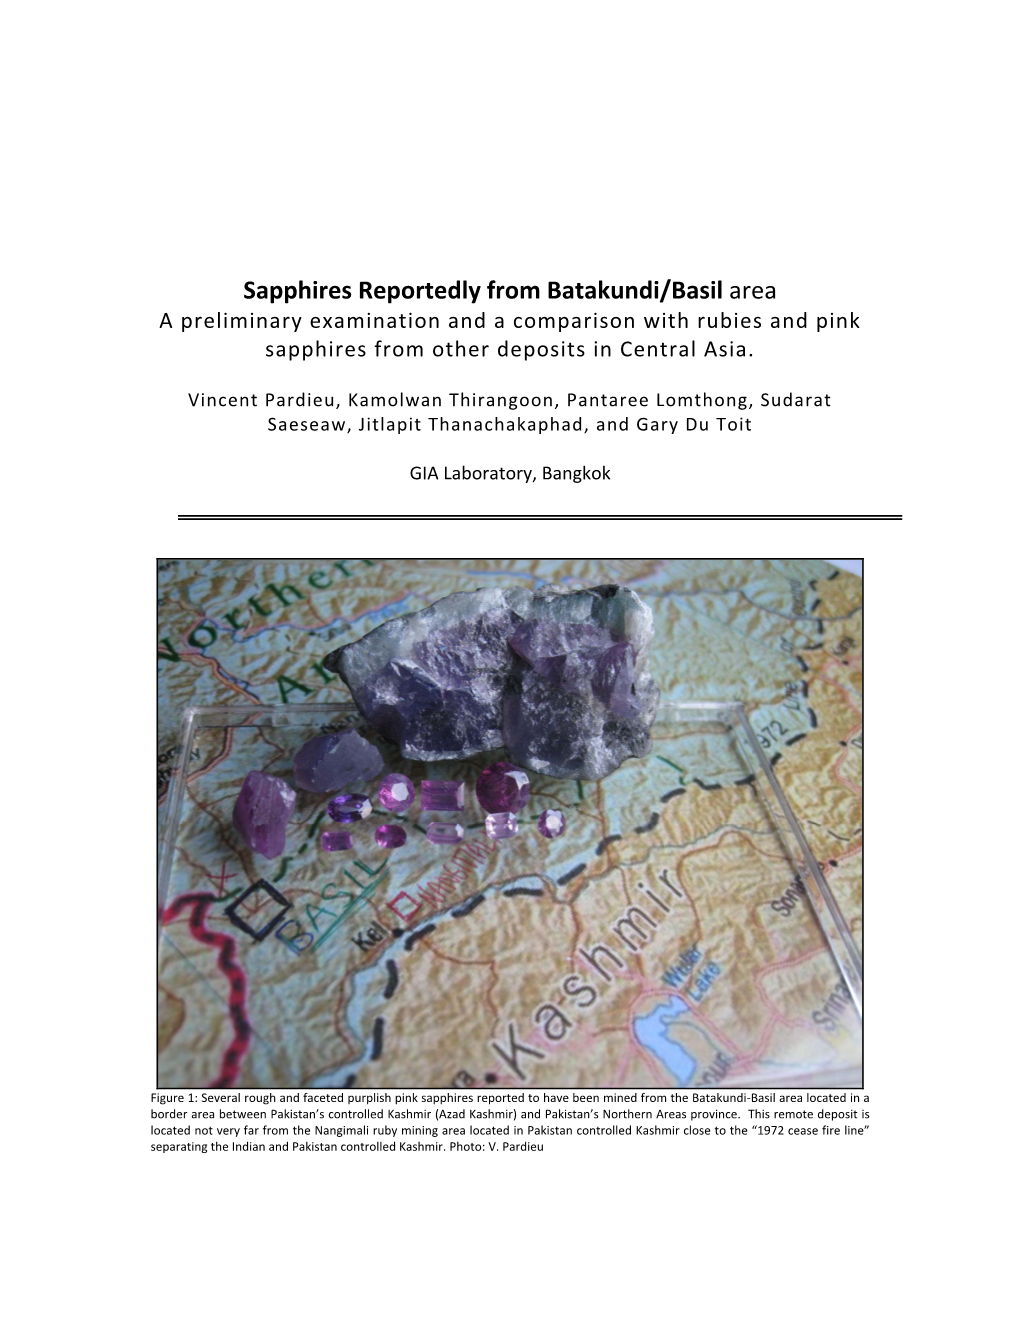 Sapphires Reportedly from Batakundi/Basil Area a Preliminary Examination and a Comparison with Rubies and Pink Sapphires from Other Deposits in Central Asia